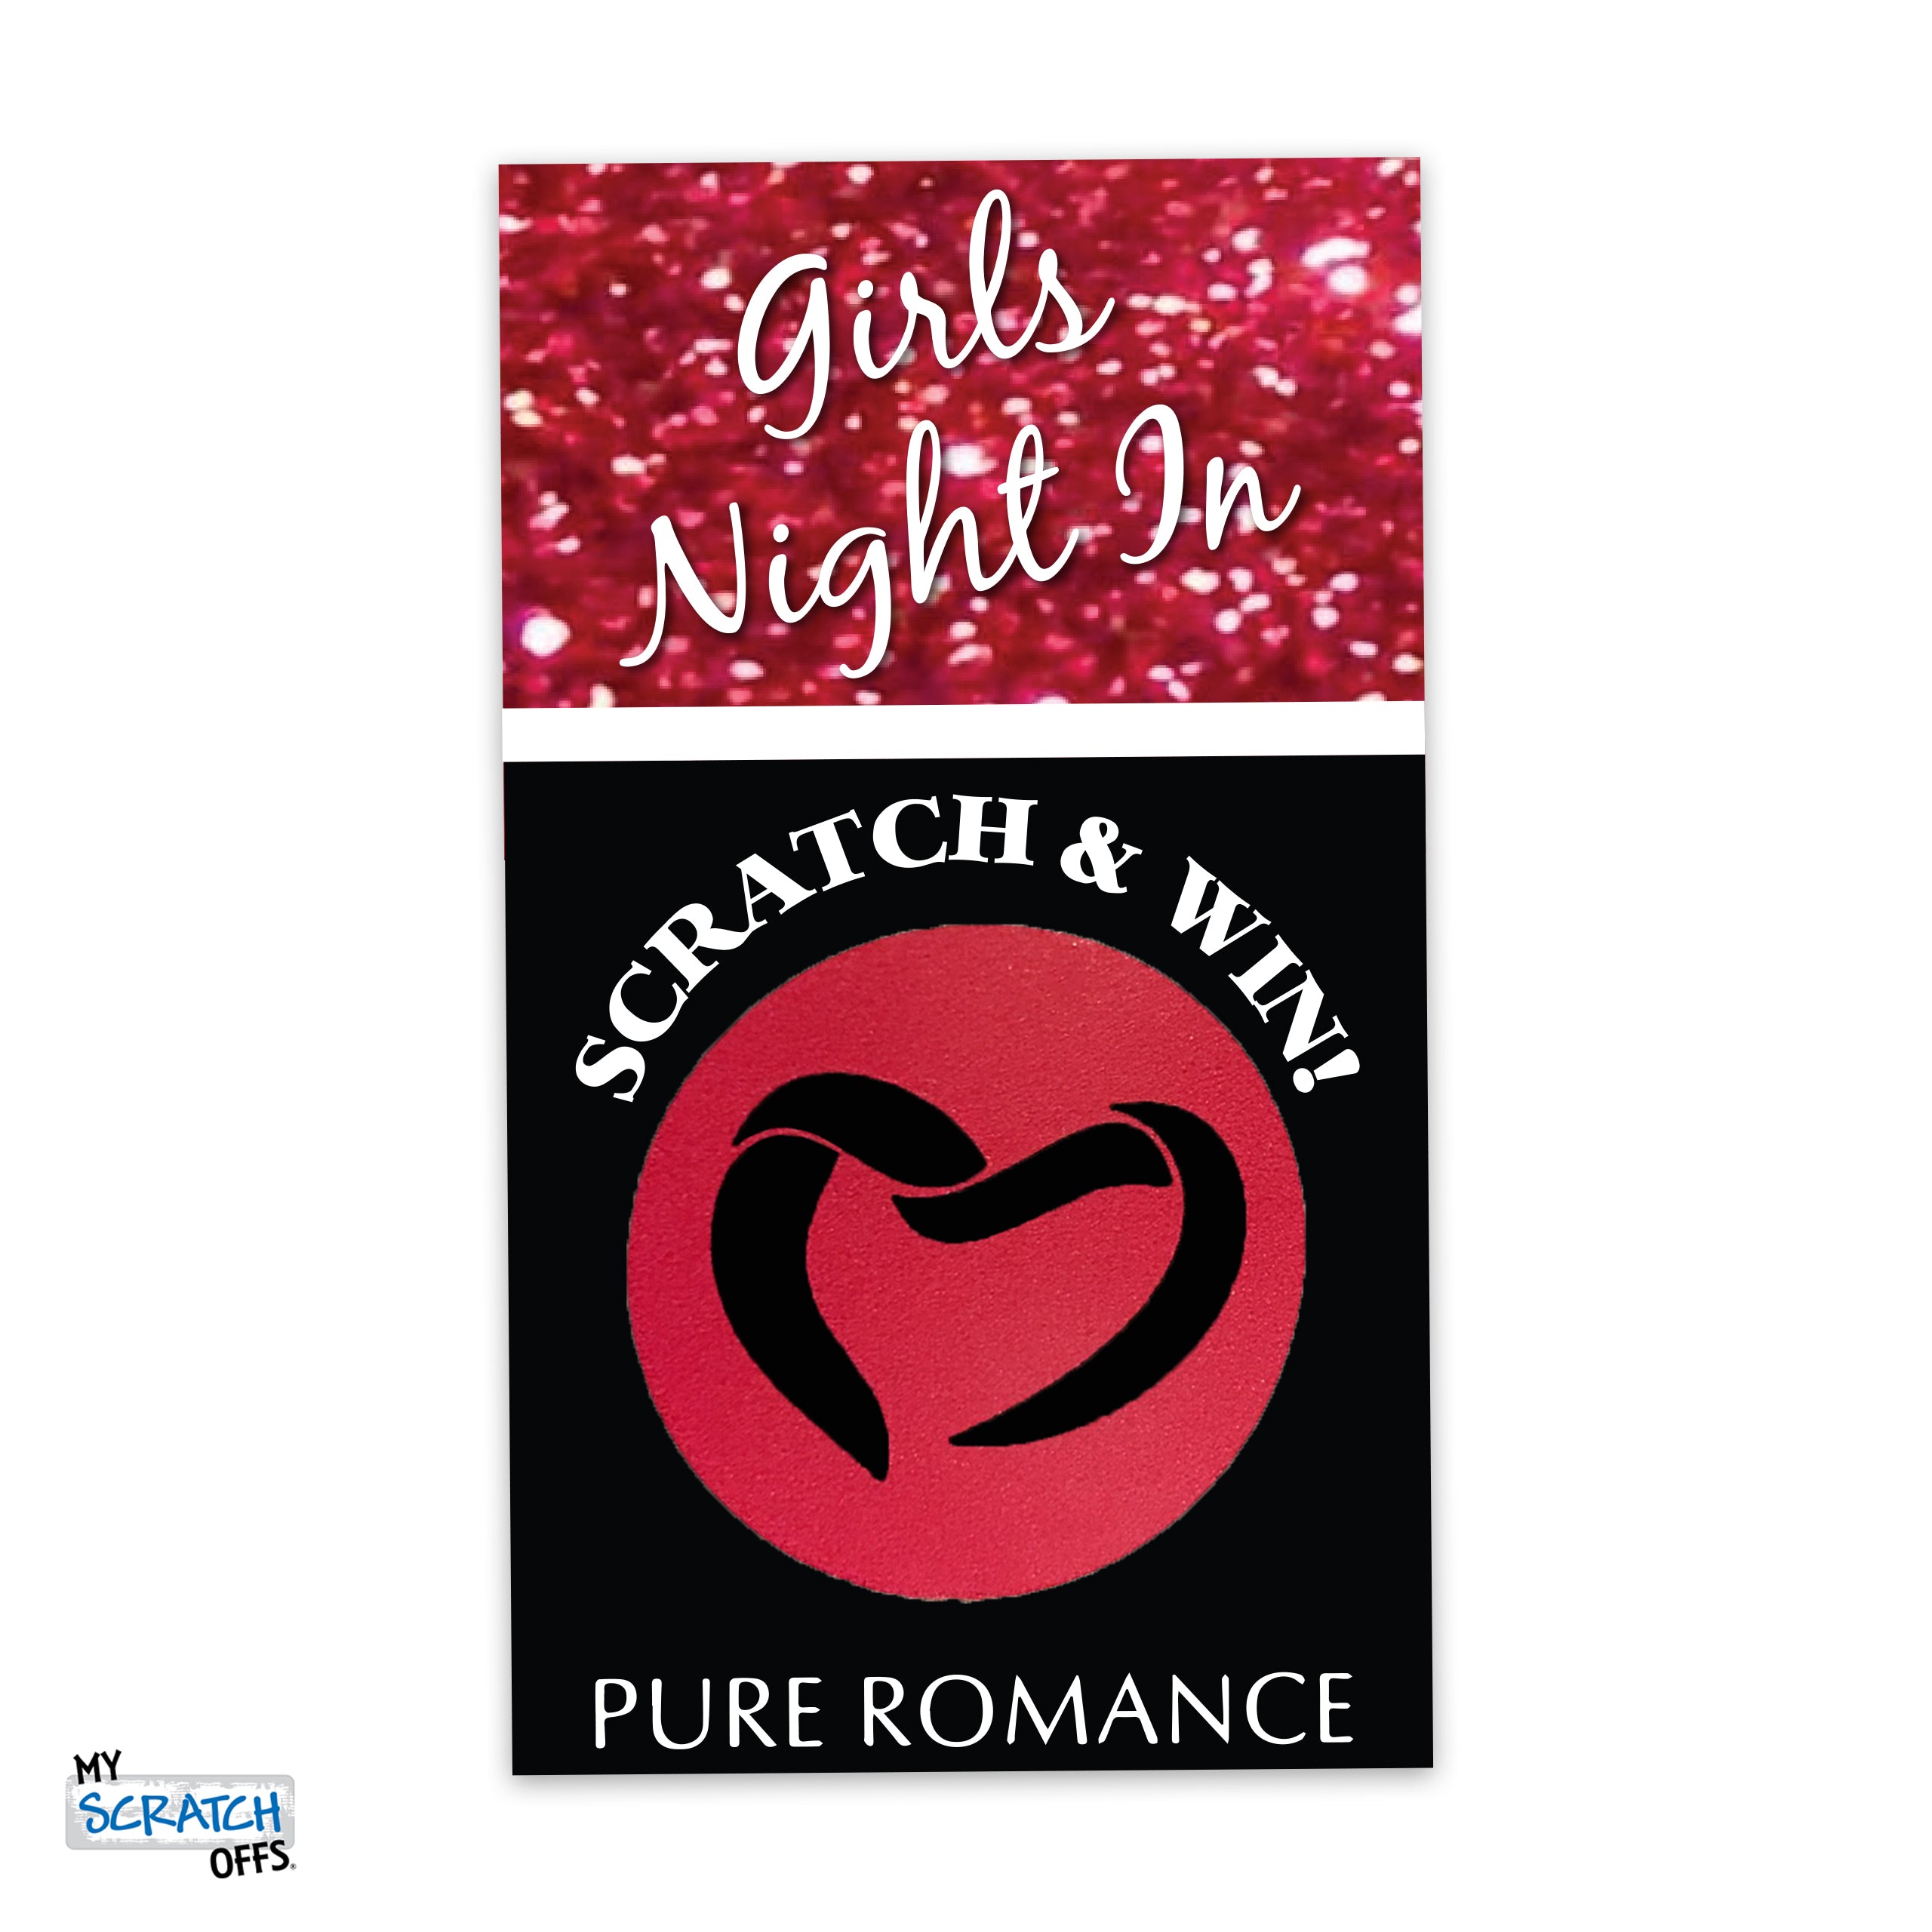 Pure Romance Girls Night In Scratch Off Party Promotion for DIY Self-Print (Digital Download) - My Scratch Offs